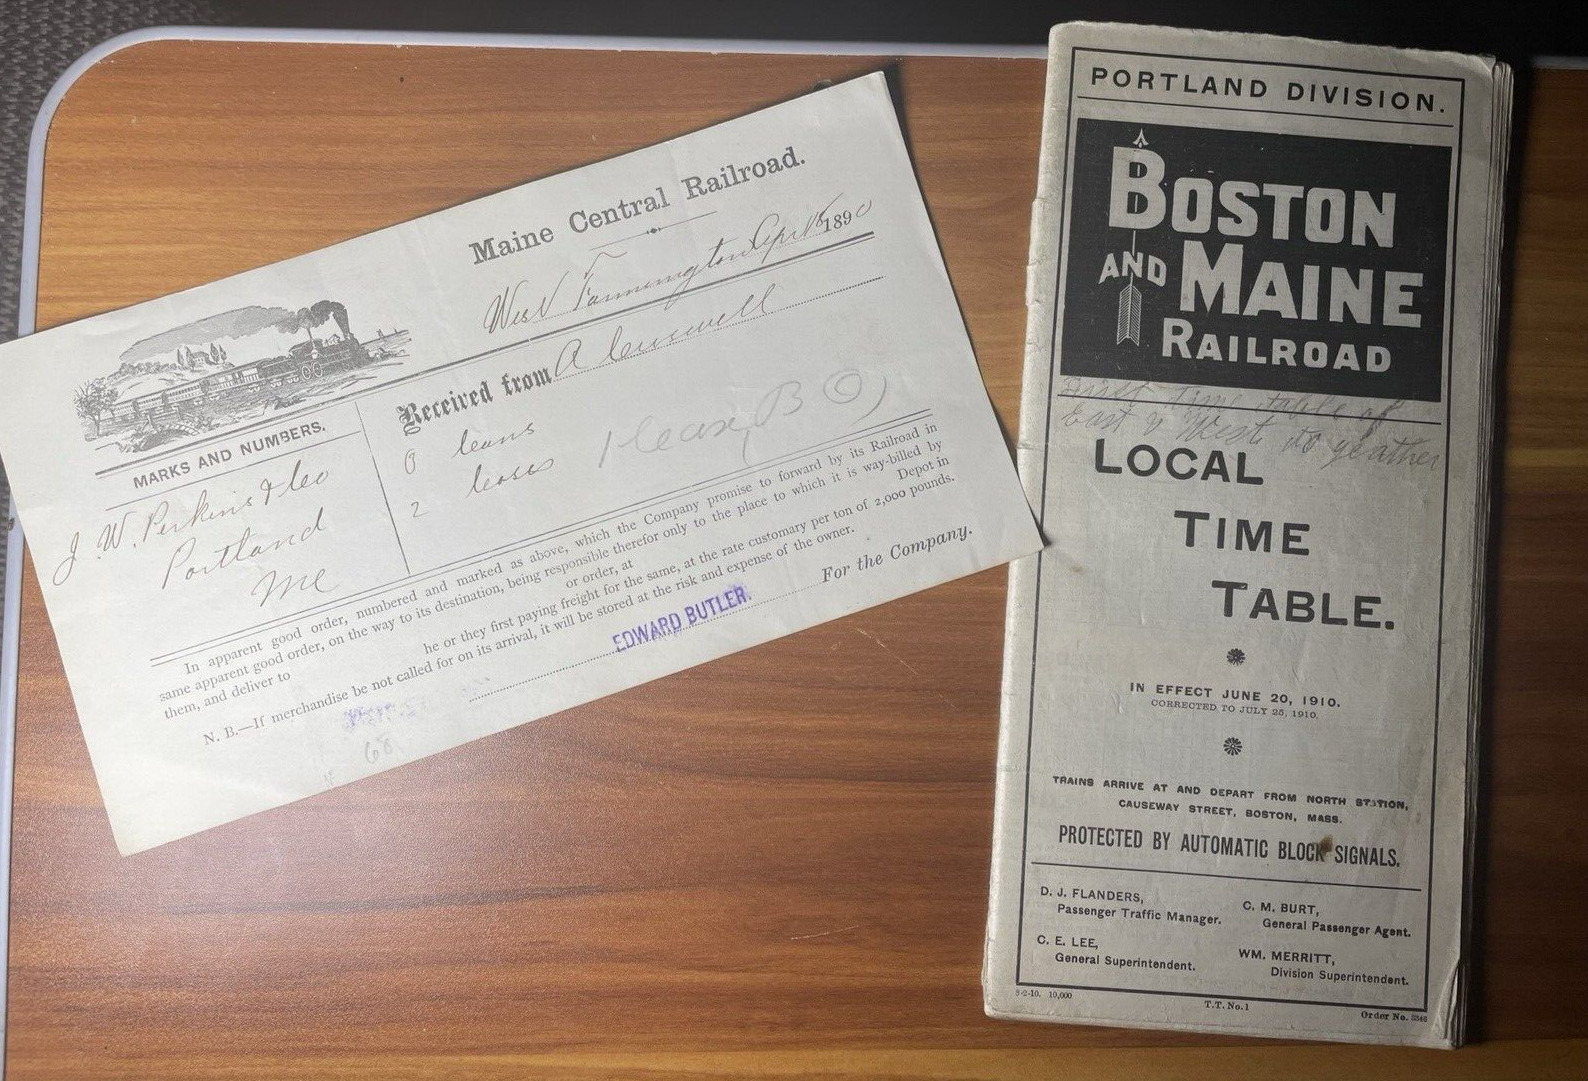 Boston and Main Railroad Time Table 1910 Maine Central RR Receipt 1890 